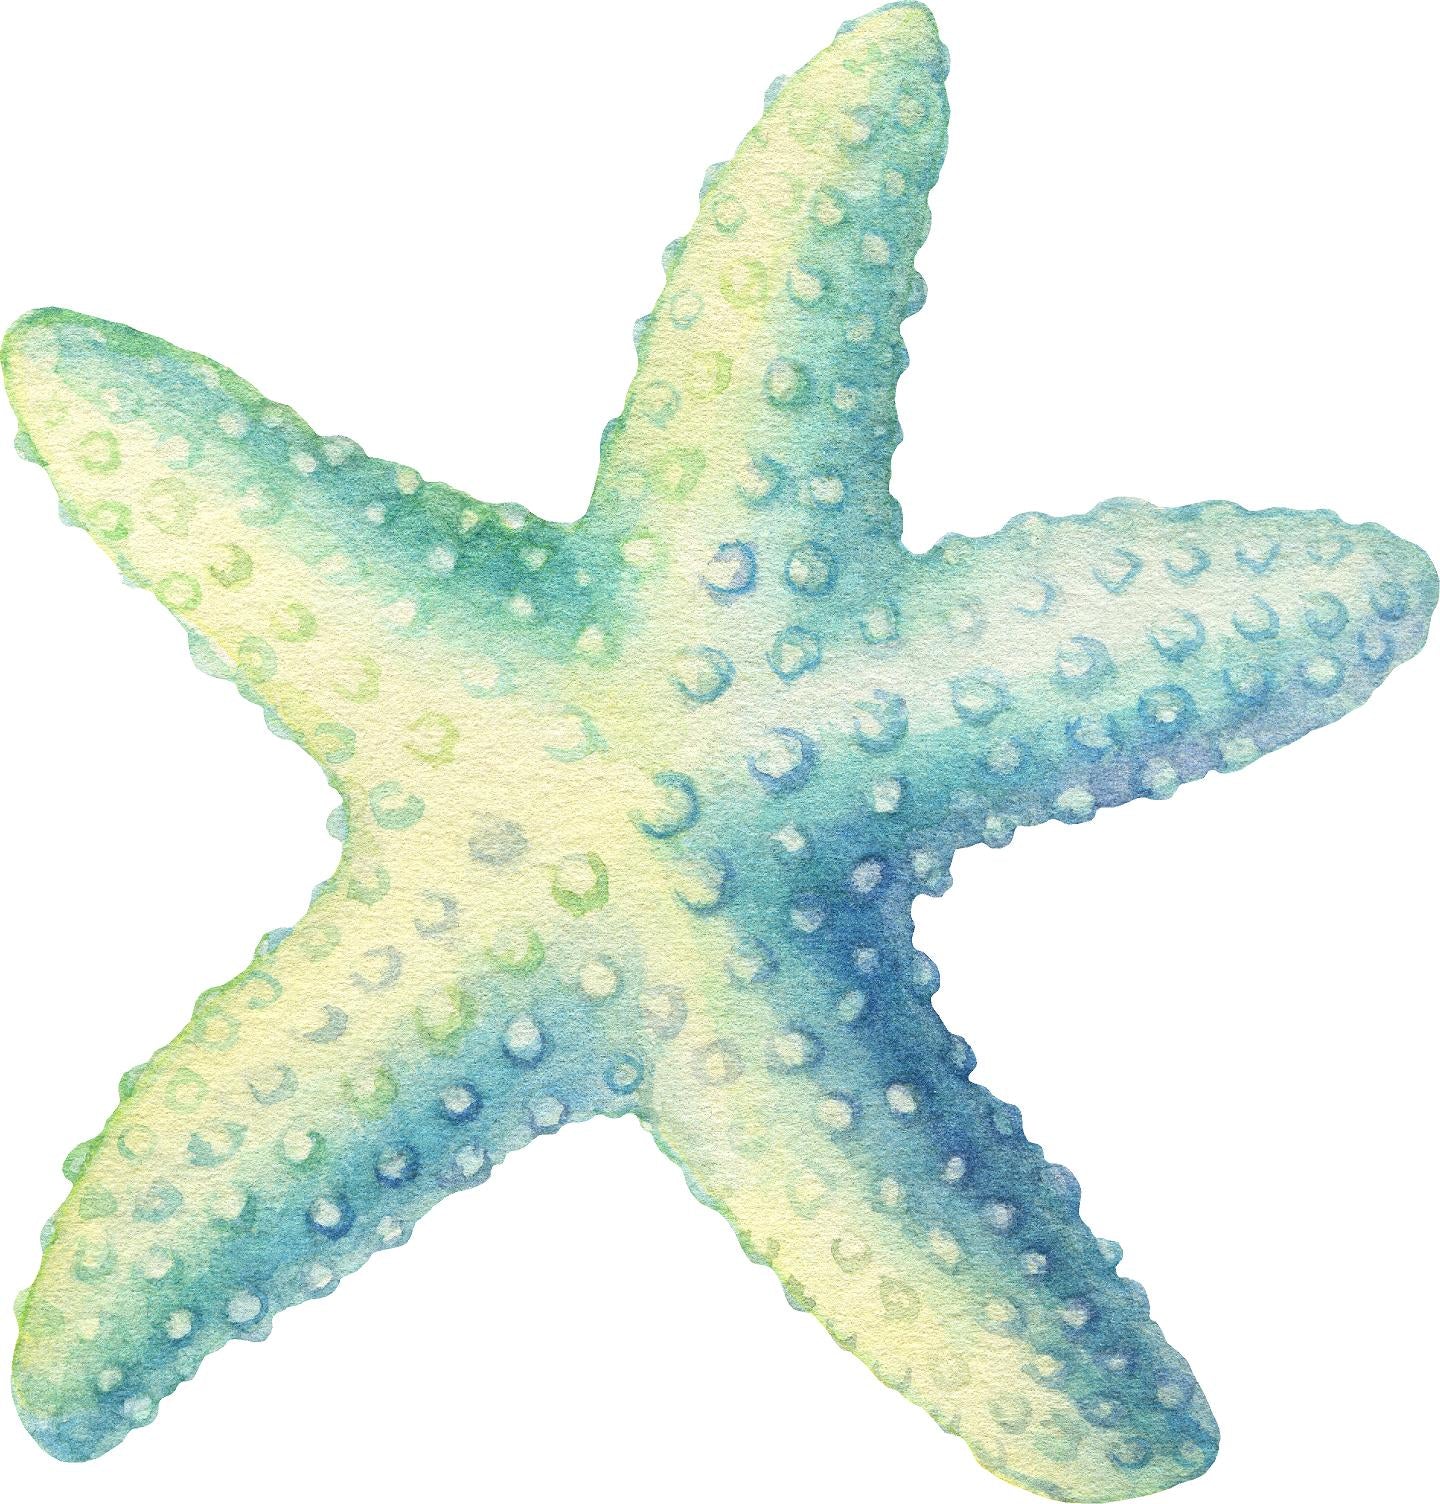 Watercolor Starfish #2 Wall Decal Removable Blue Green Yellow Sea Star Wall Sticker | DecalBaby